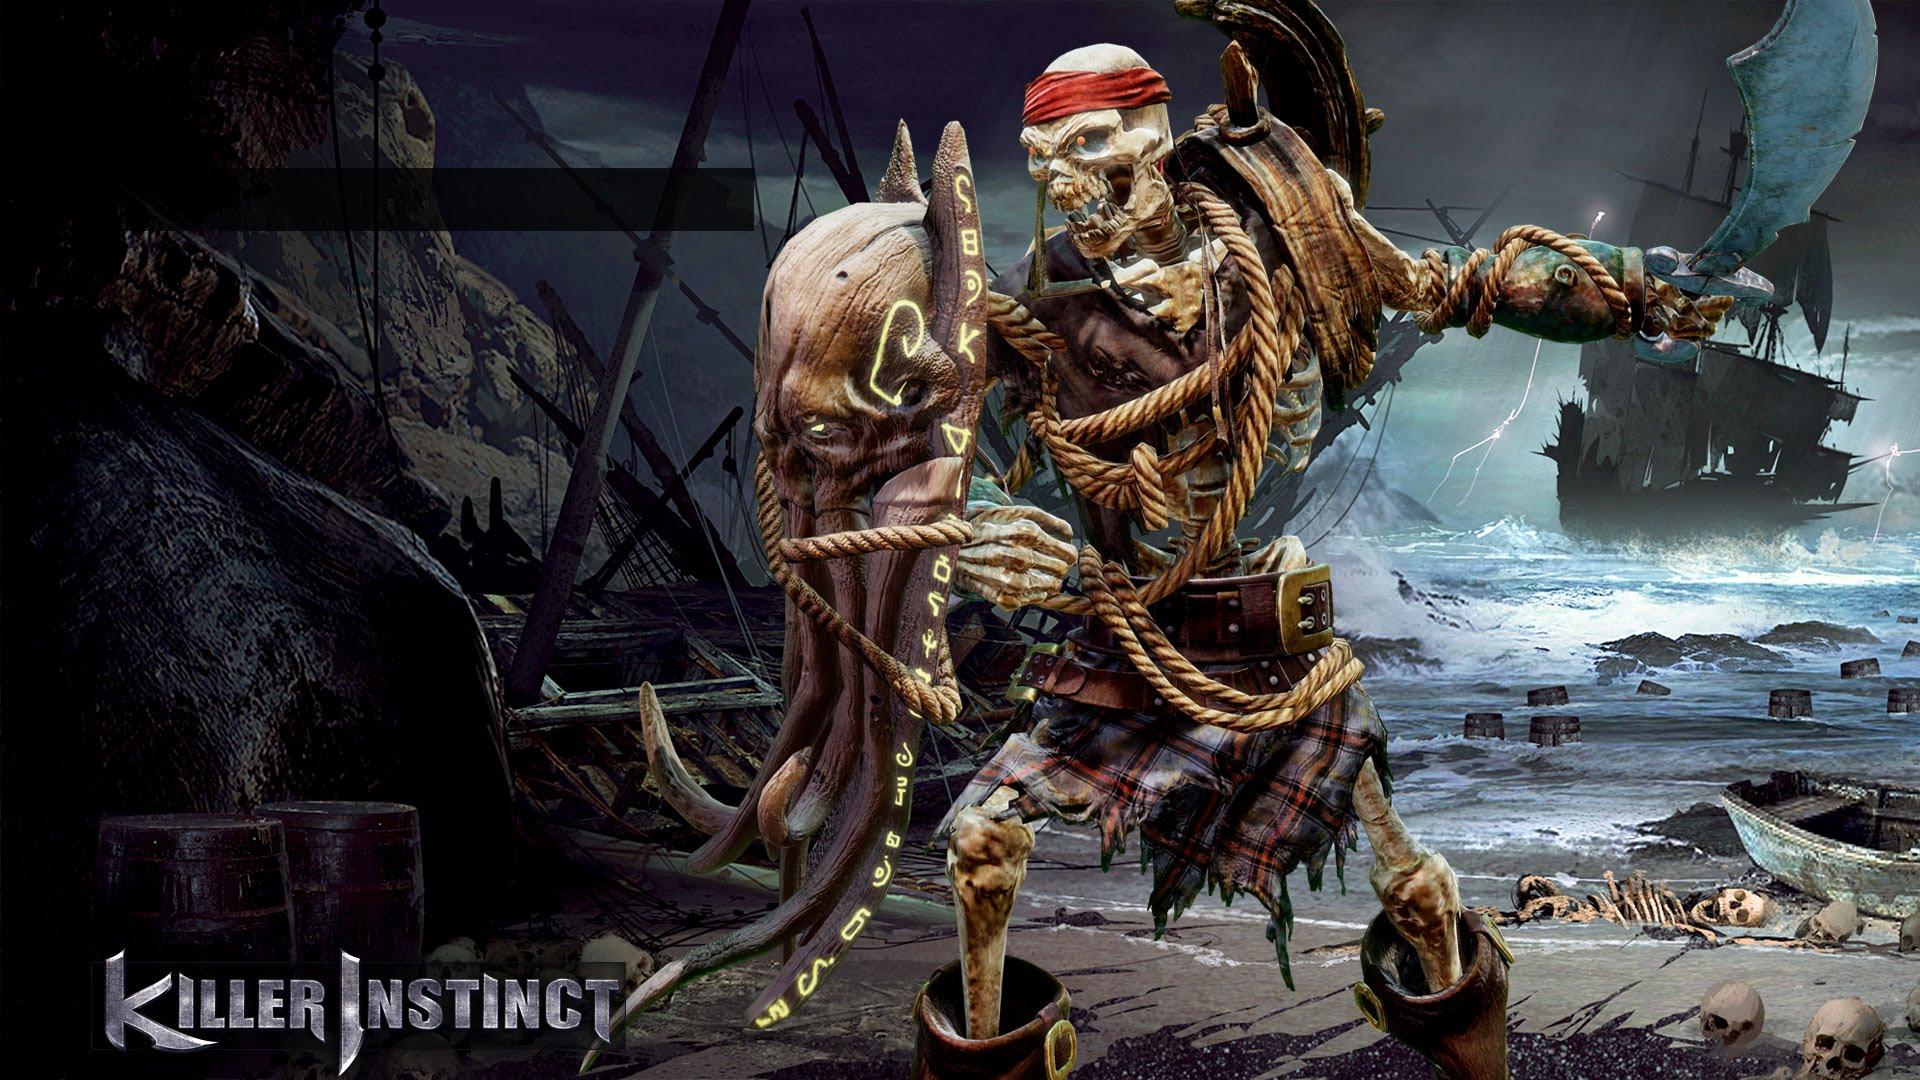 Would anyone else love to see Spinal-the pirate skeleton